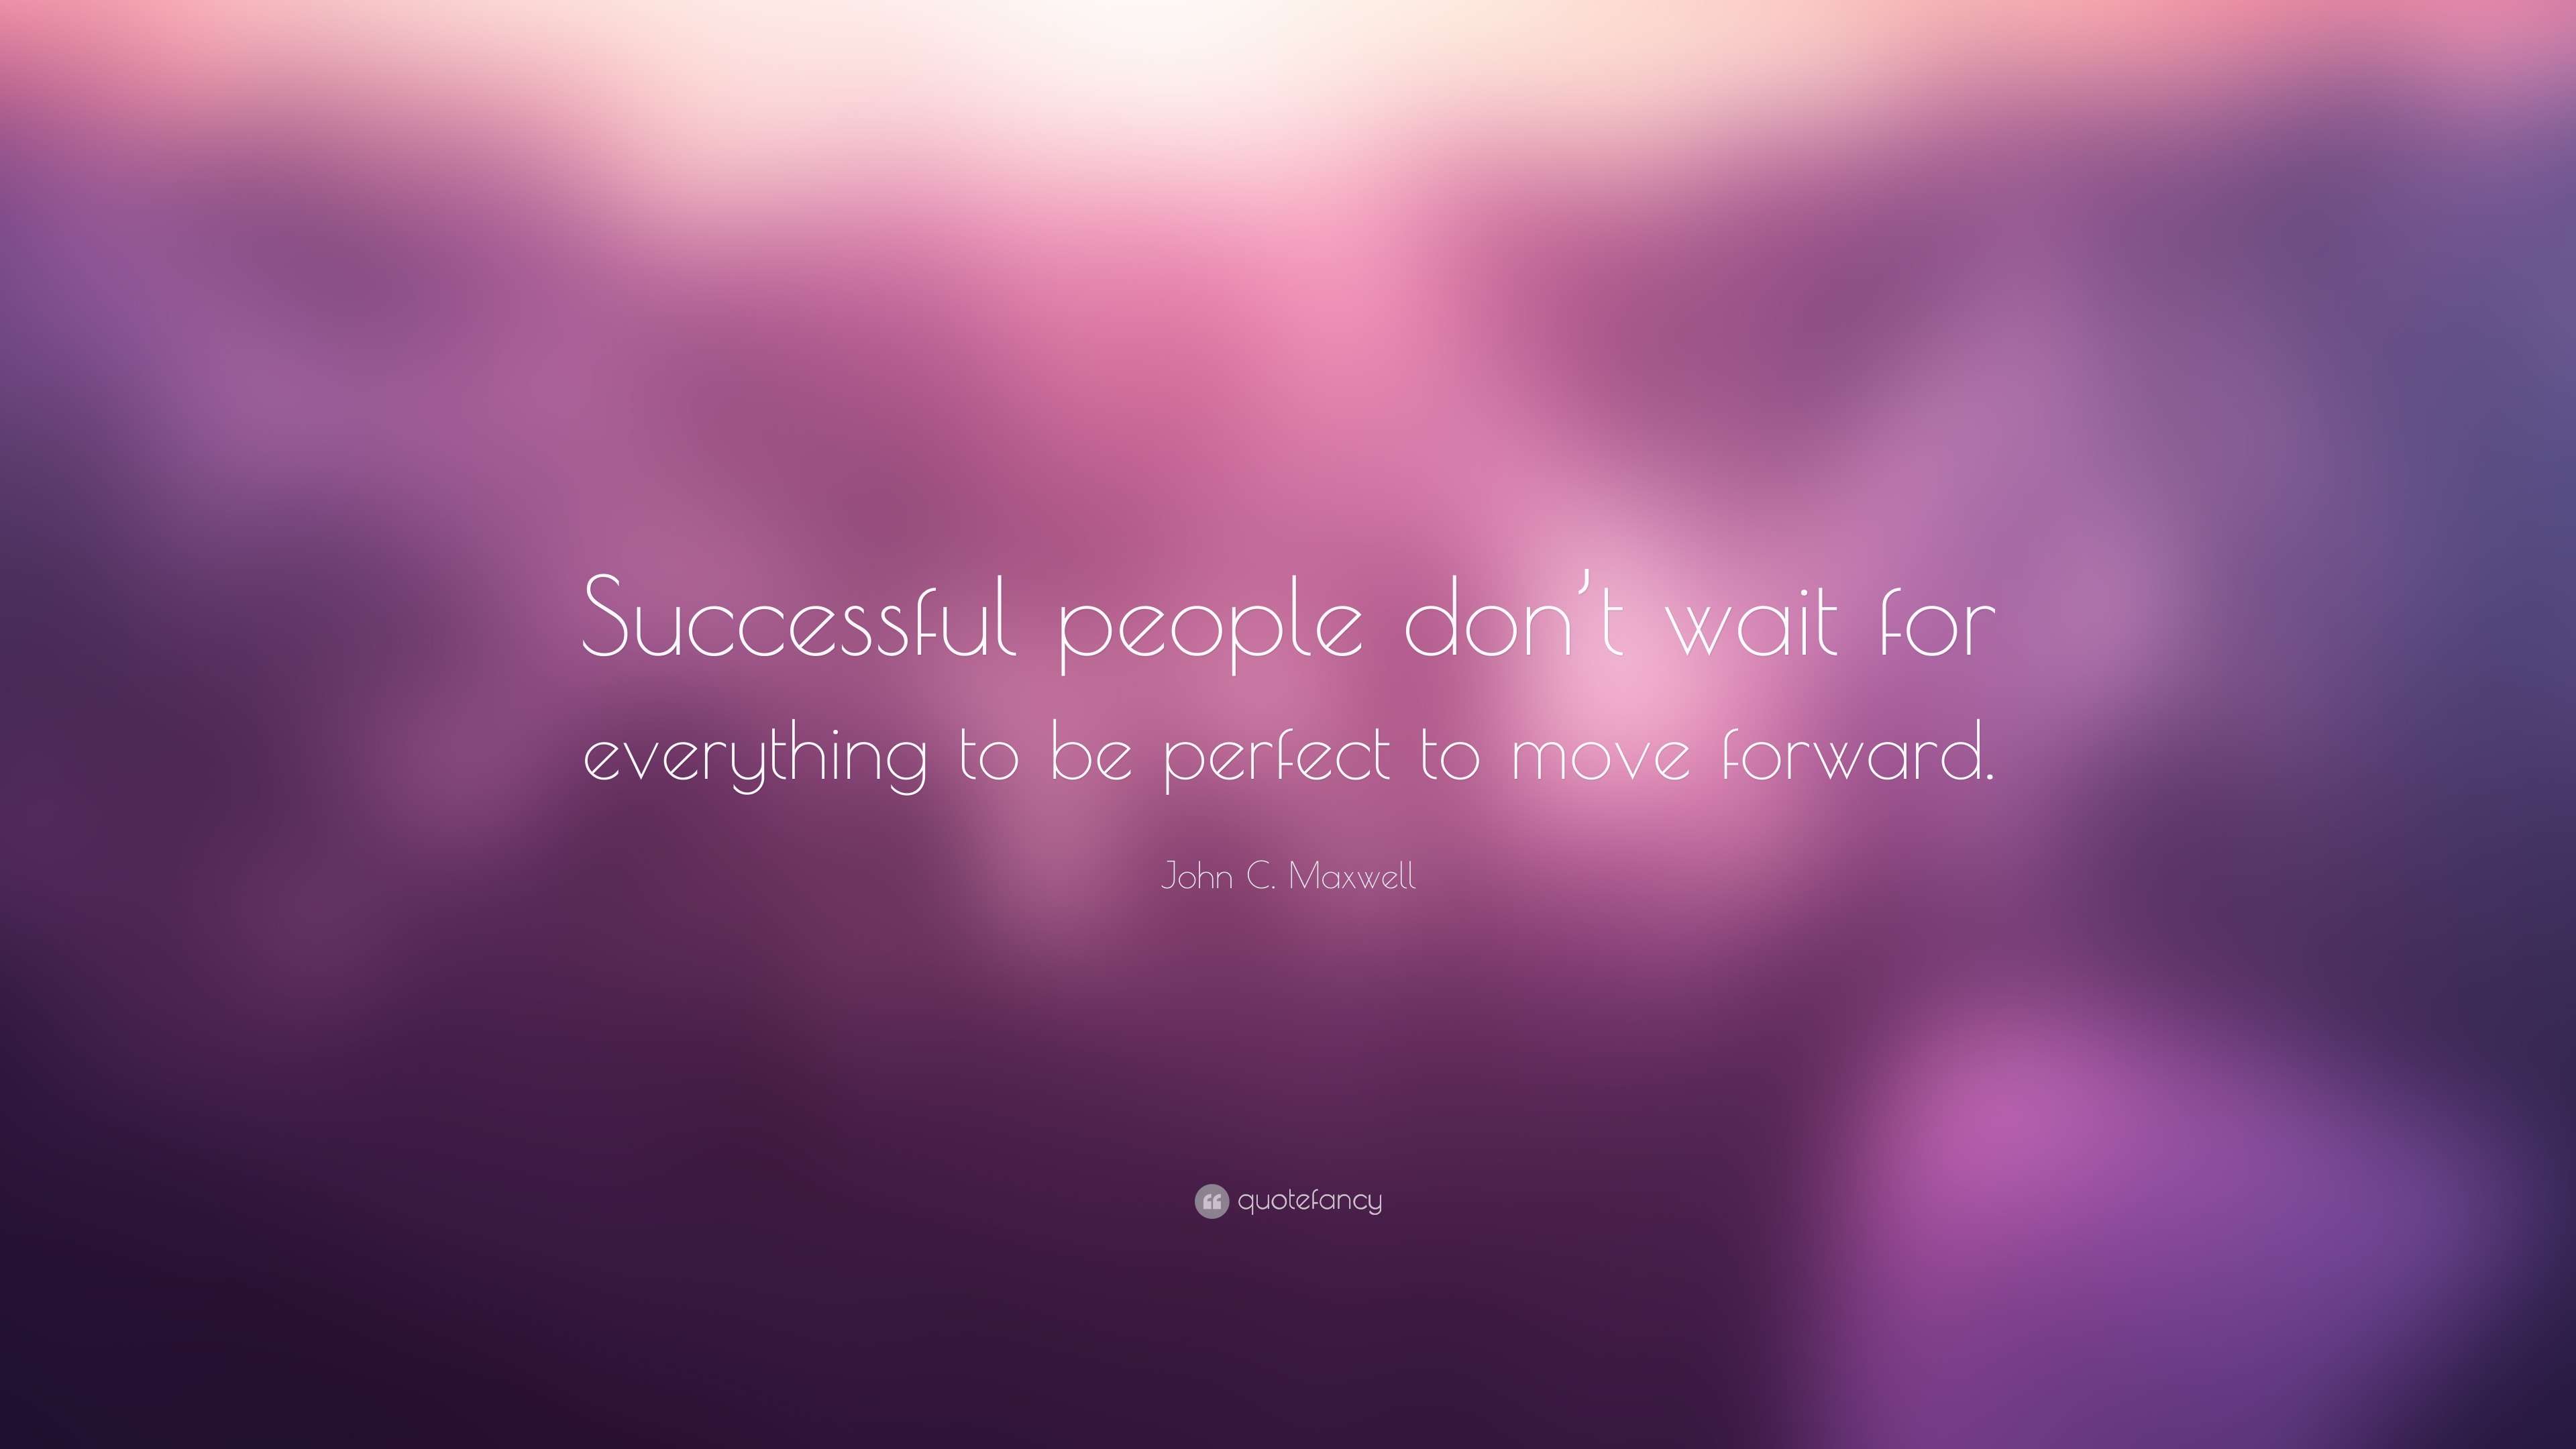 John C. Maxwell Quote: “Successful people don’t wait for everything to ...